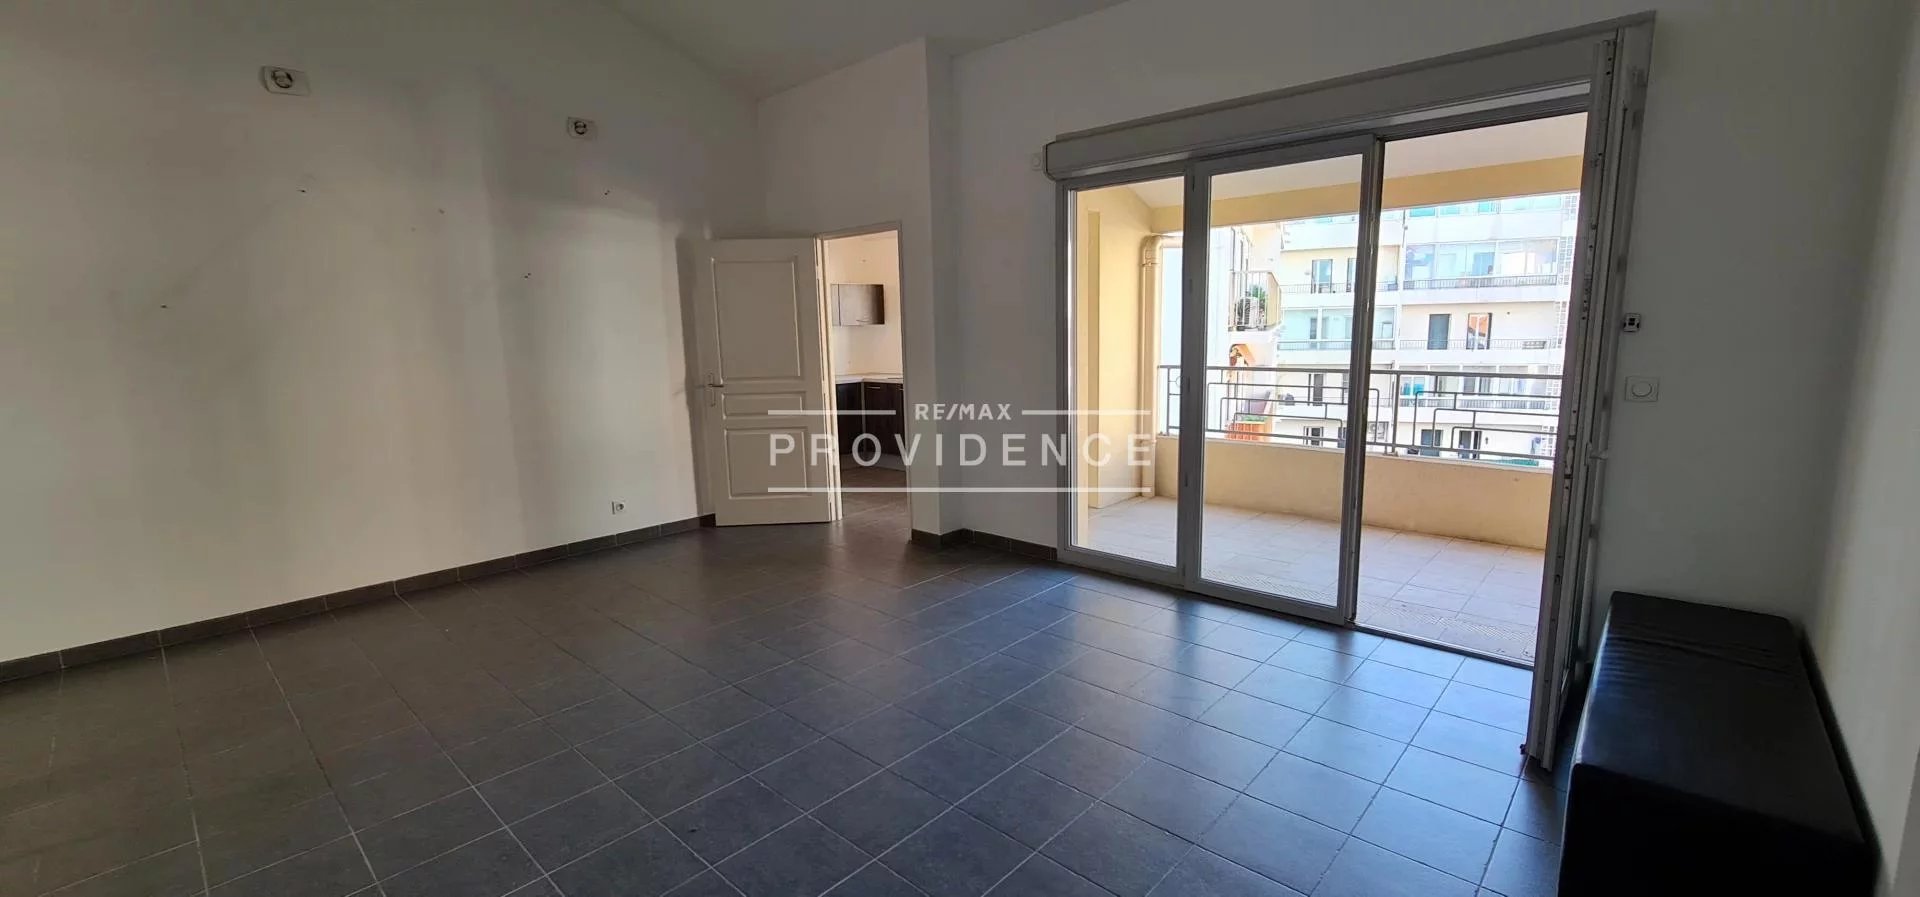 Appartement 4 pièces 85 m² Antibes